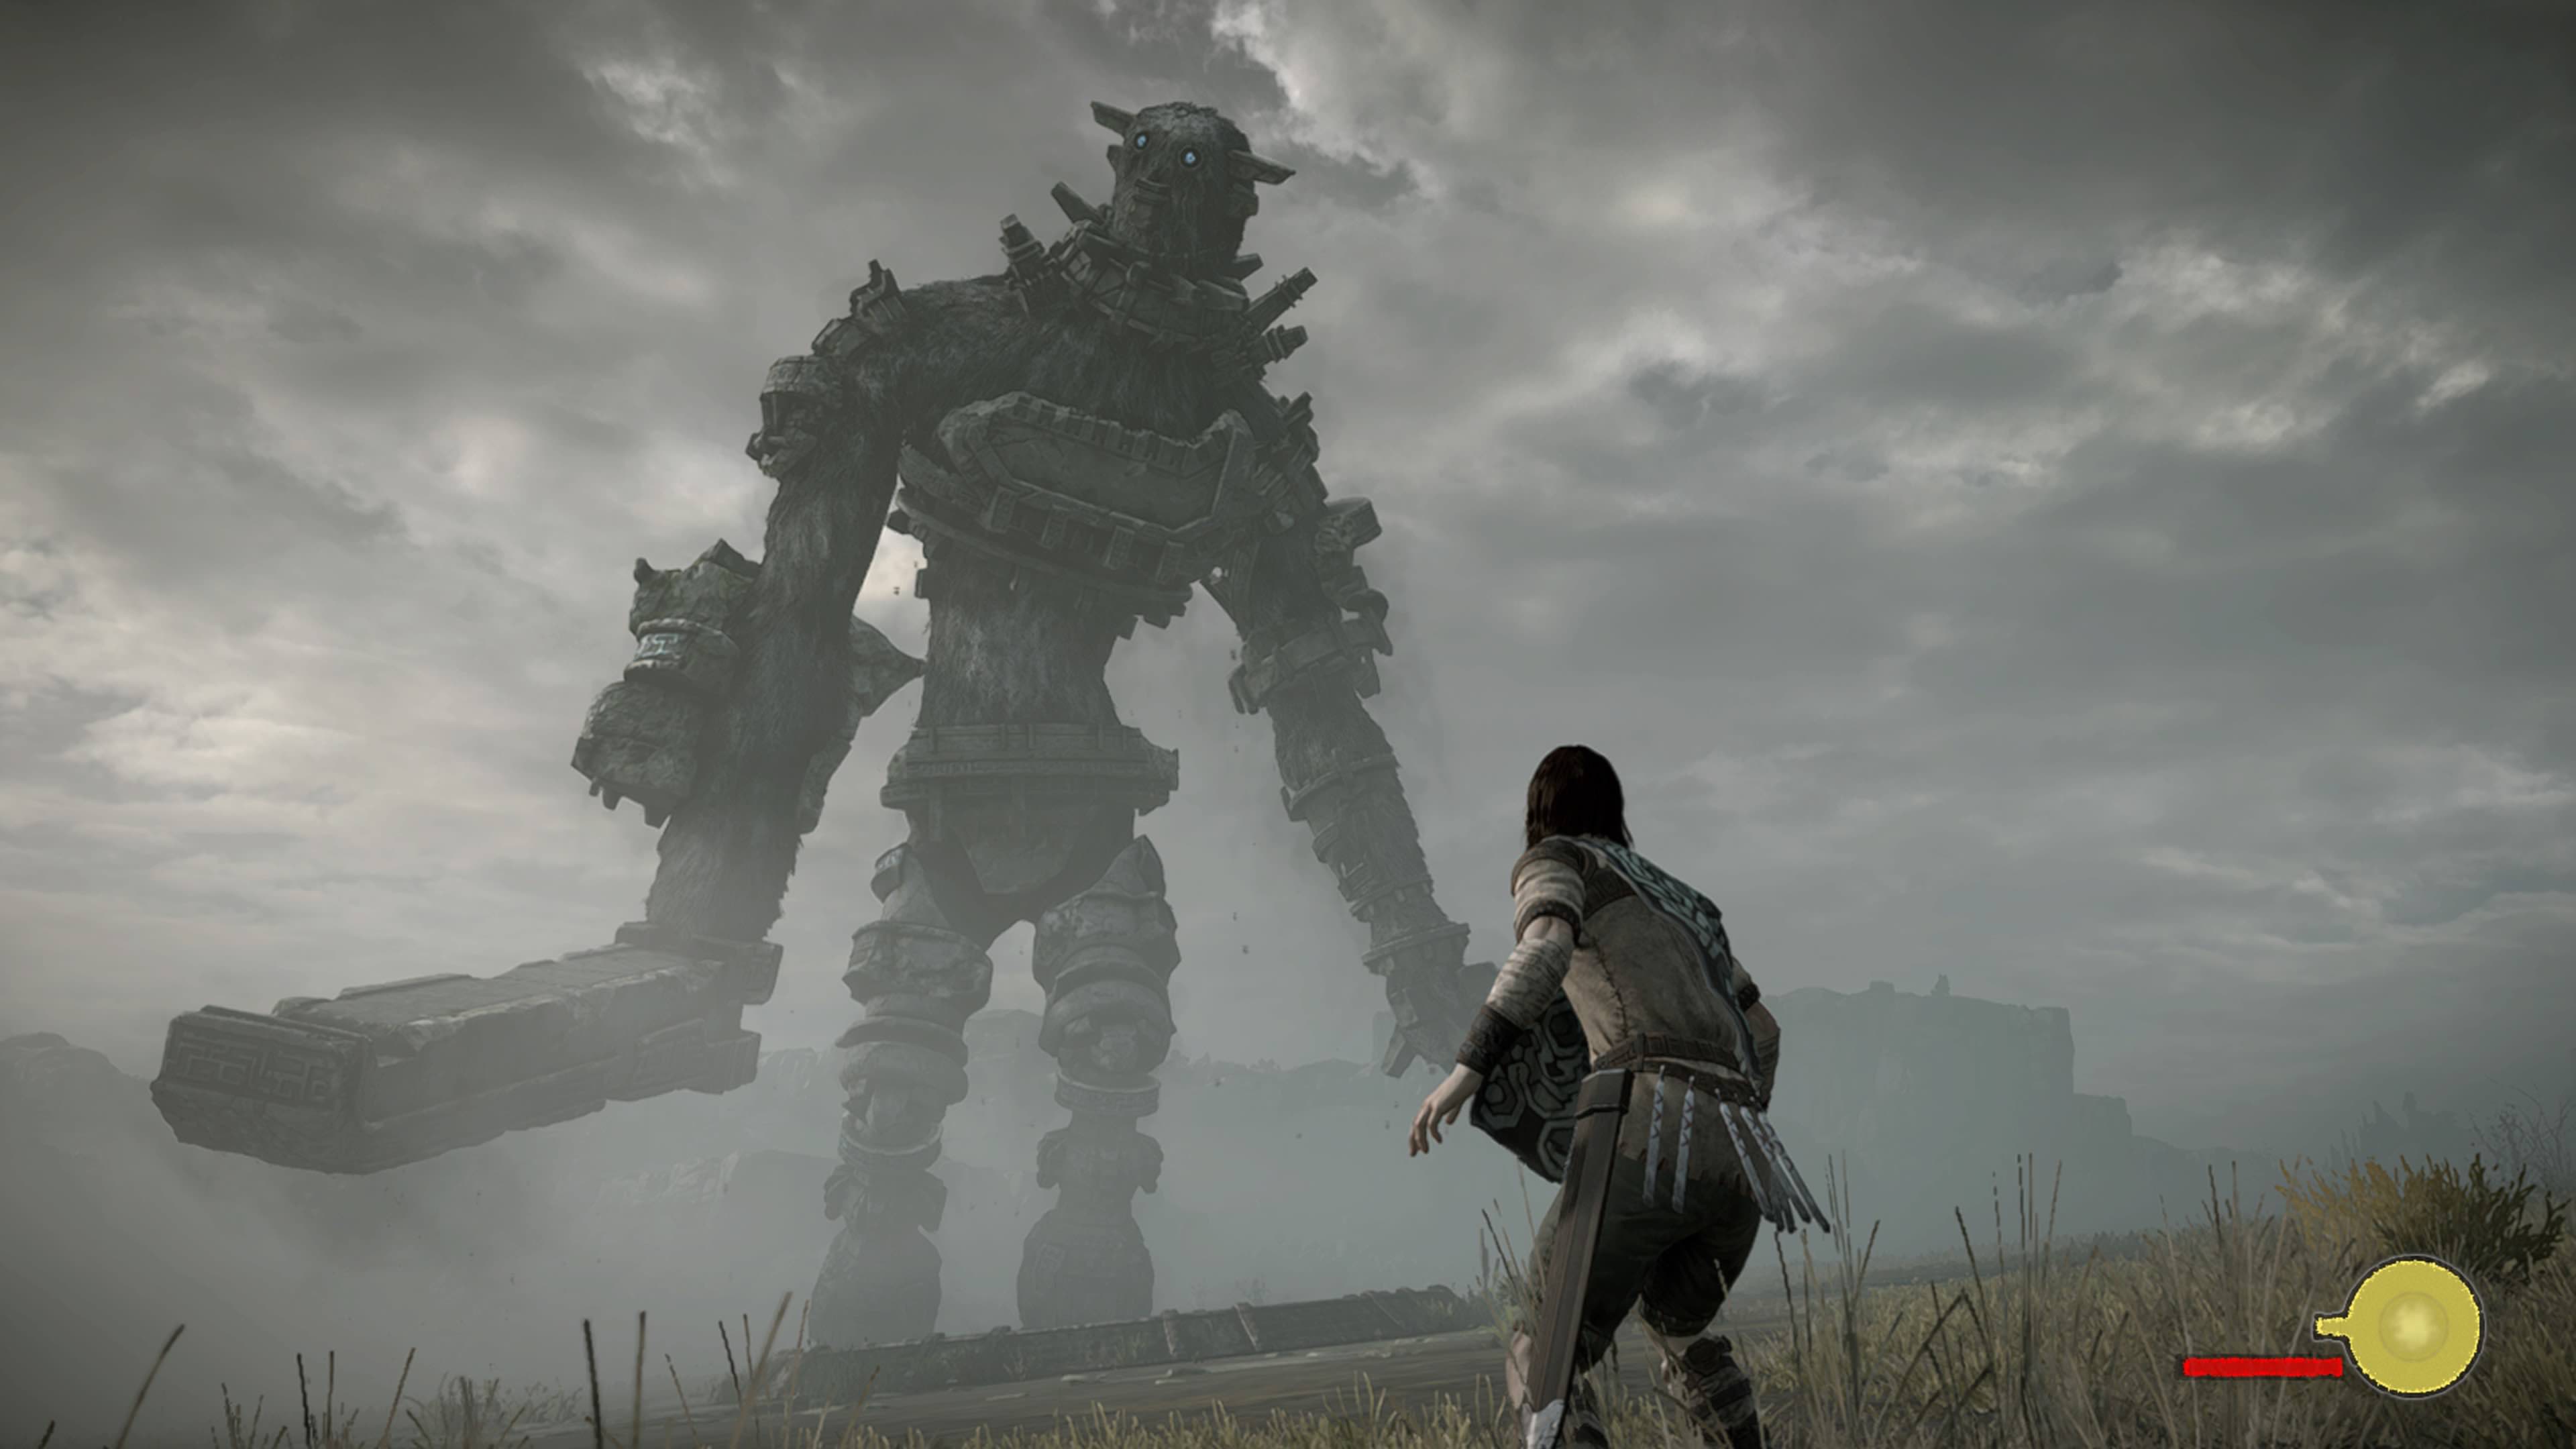 pc ps2 emulator bios for shadow of the colossus